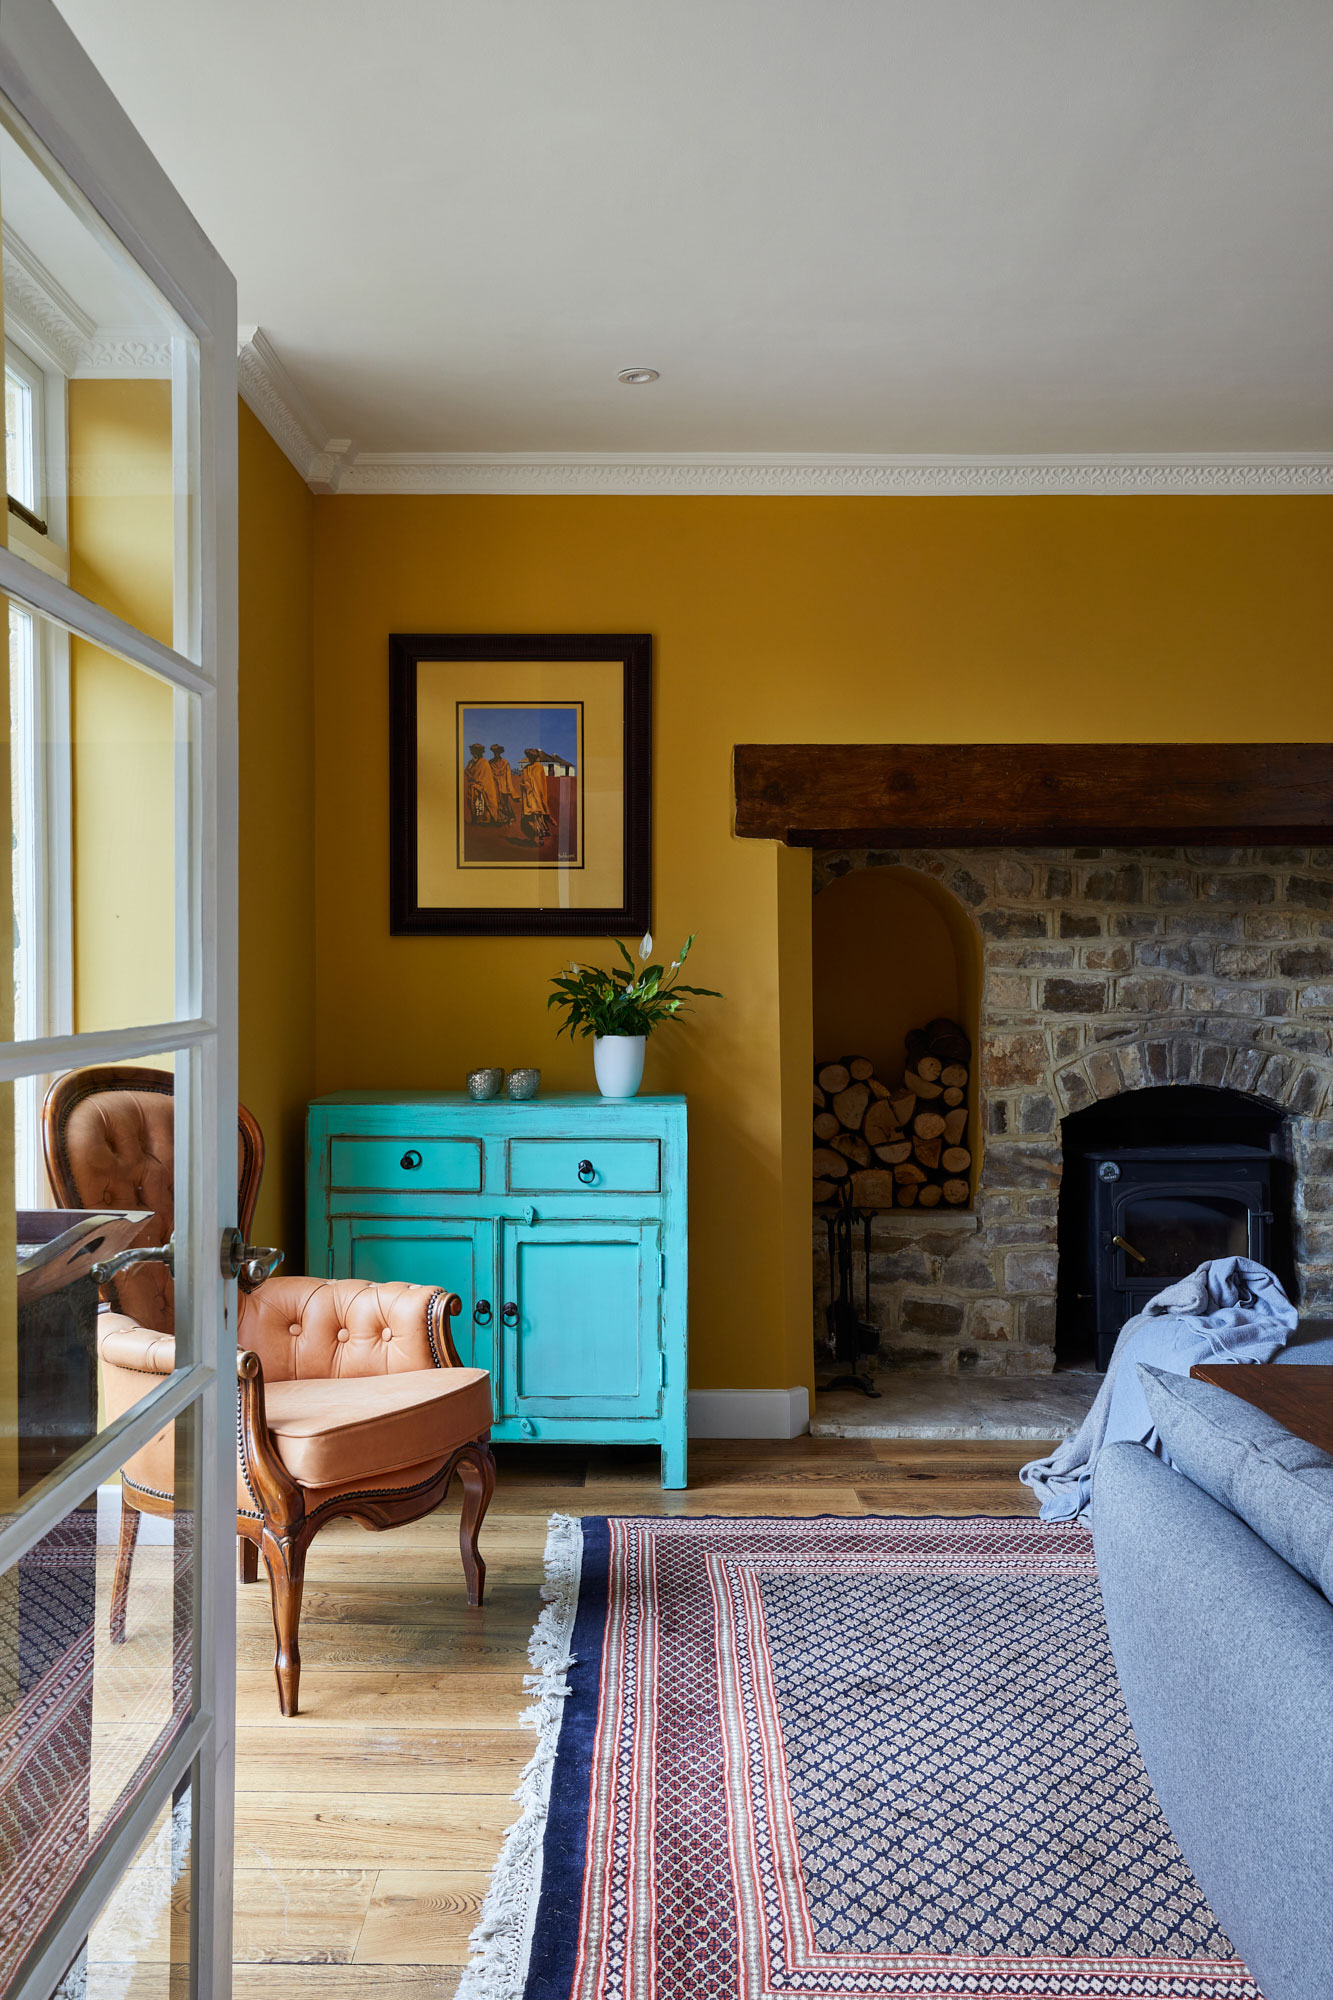 Living room painted in yellow